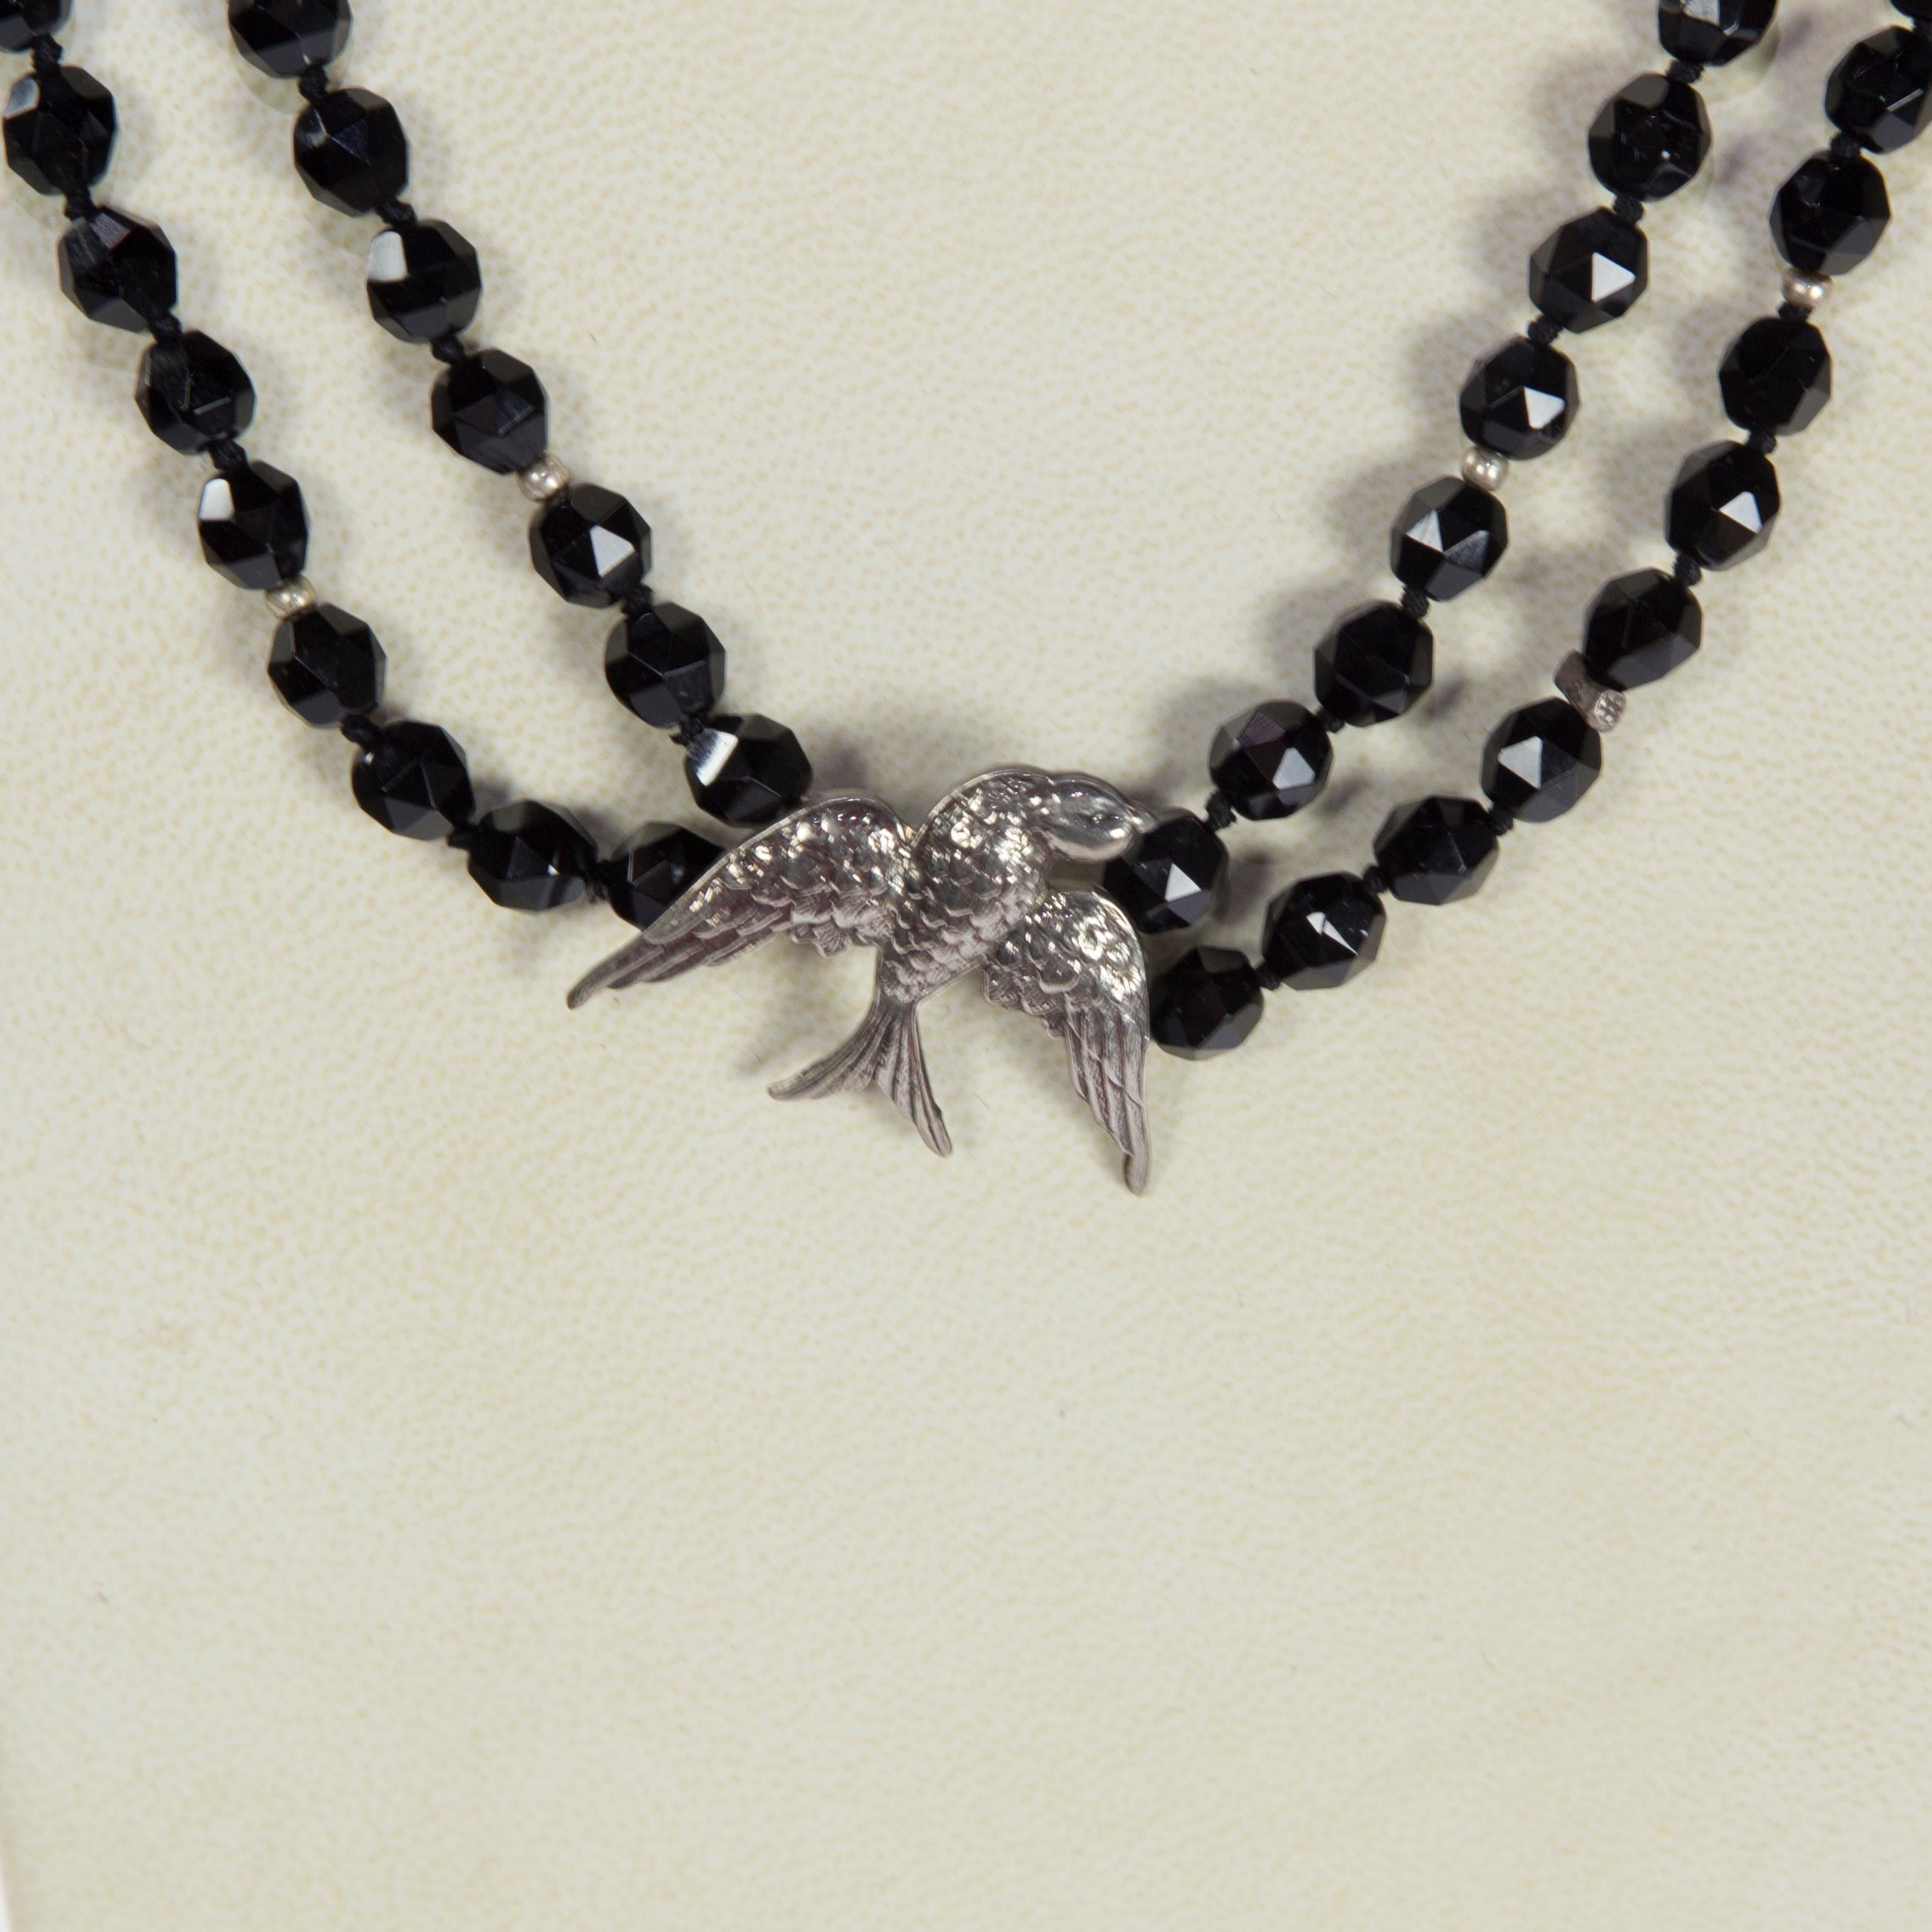 Awesome Faceted Onyx Beads Necklace inter-spaced with Sterling Silver spacers and centered by a Sterling Silver Swallow Bird; newly hand strung and knotted; Approx. 52